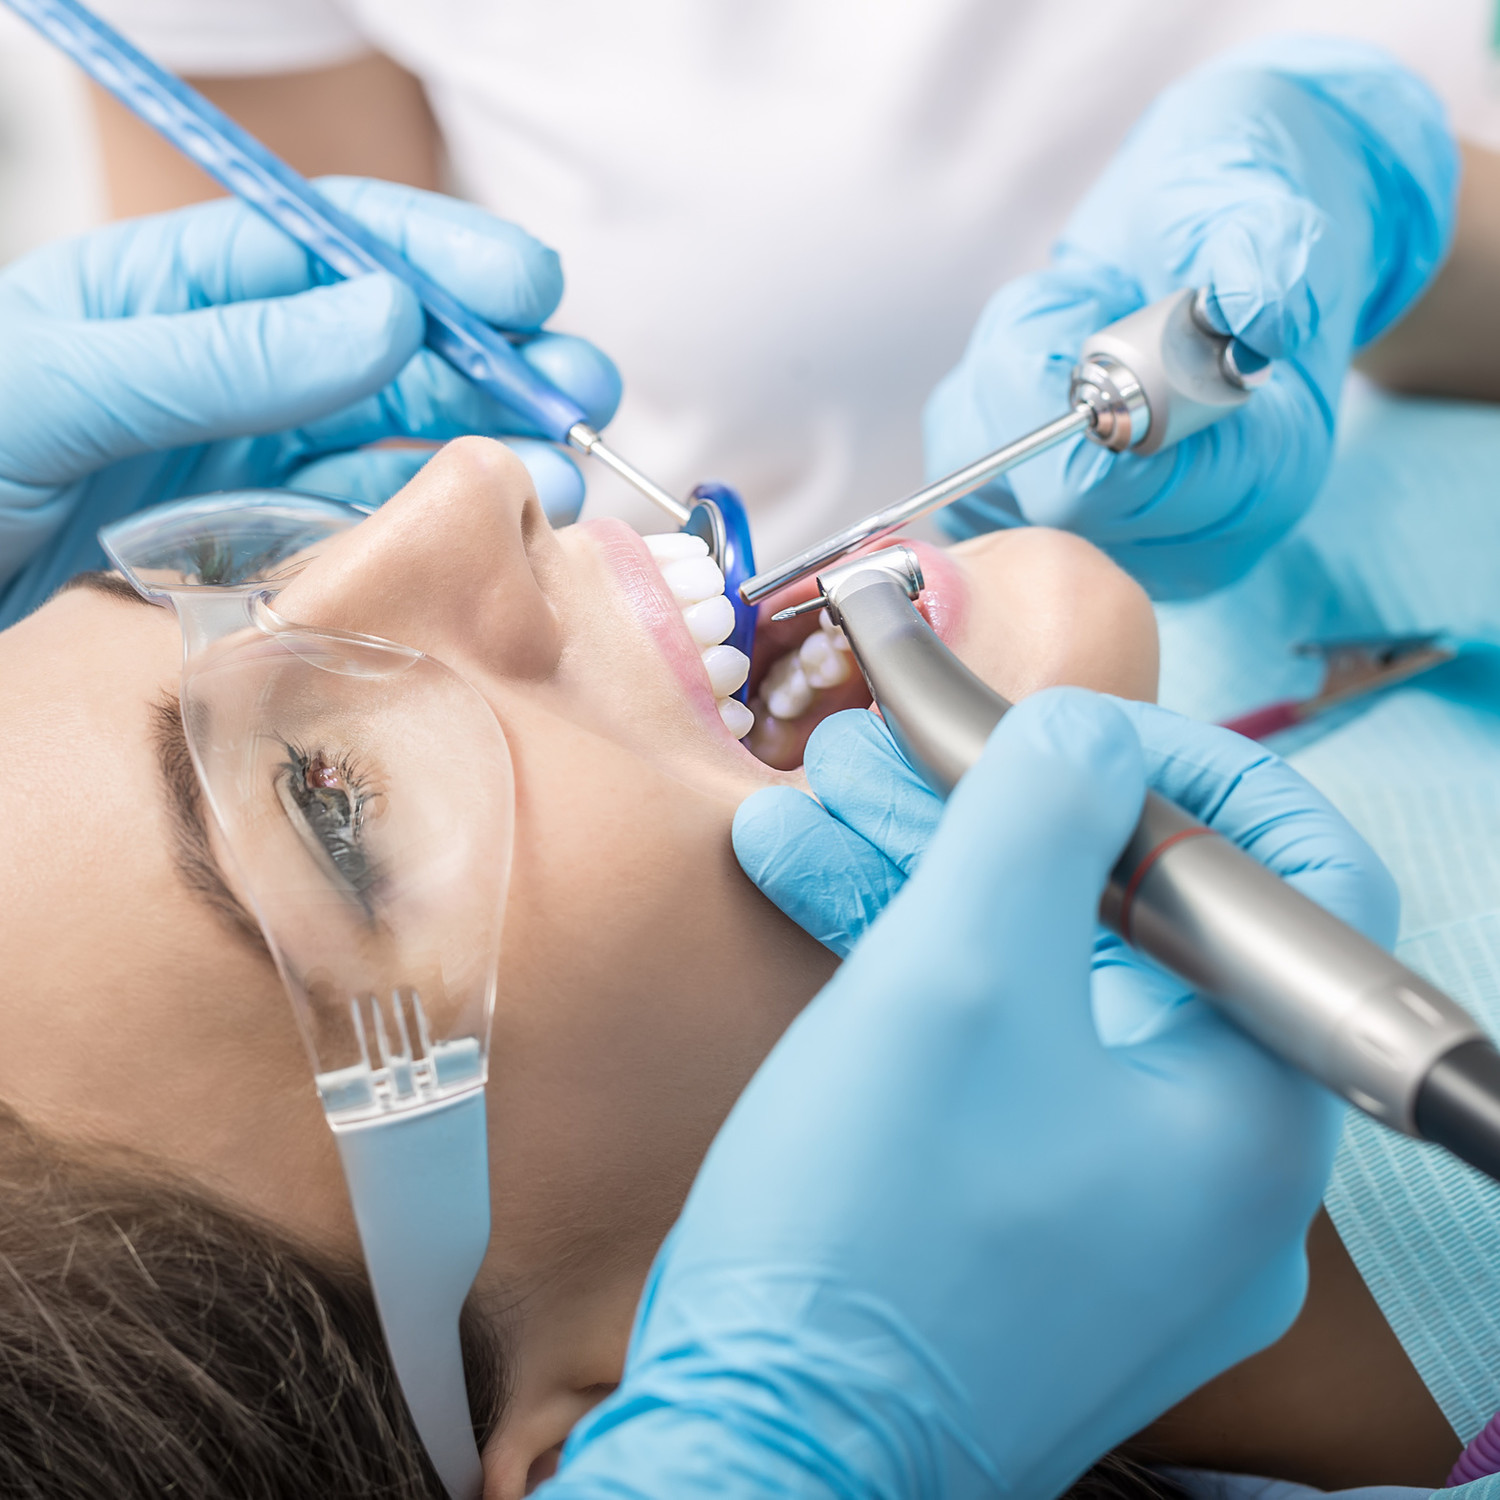 dental, dentistry, dentist, patient, doctor, medical, medicine, clinic, office, equipment, health, healthy, professional, instrument, healthcare, diagnostic, portrait, young, uniform, glove, girl, woman, female, people, care, treatment, bib, mirror, teeth, air, water, syringe, handpiece, protective, glasses, goggles, saliva, ejector, closeup, close-up